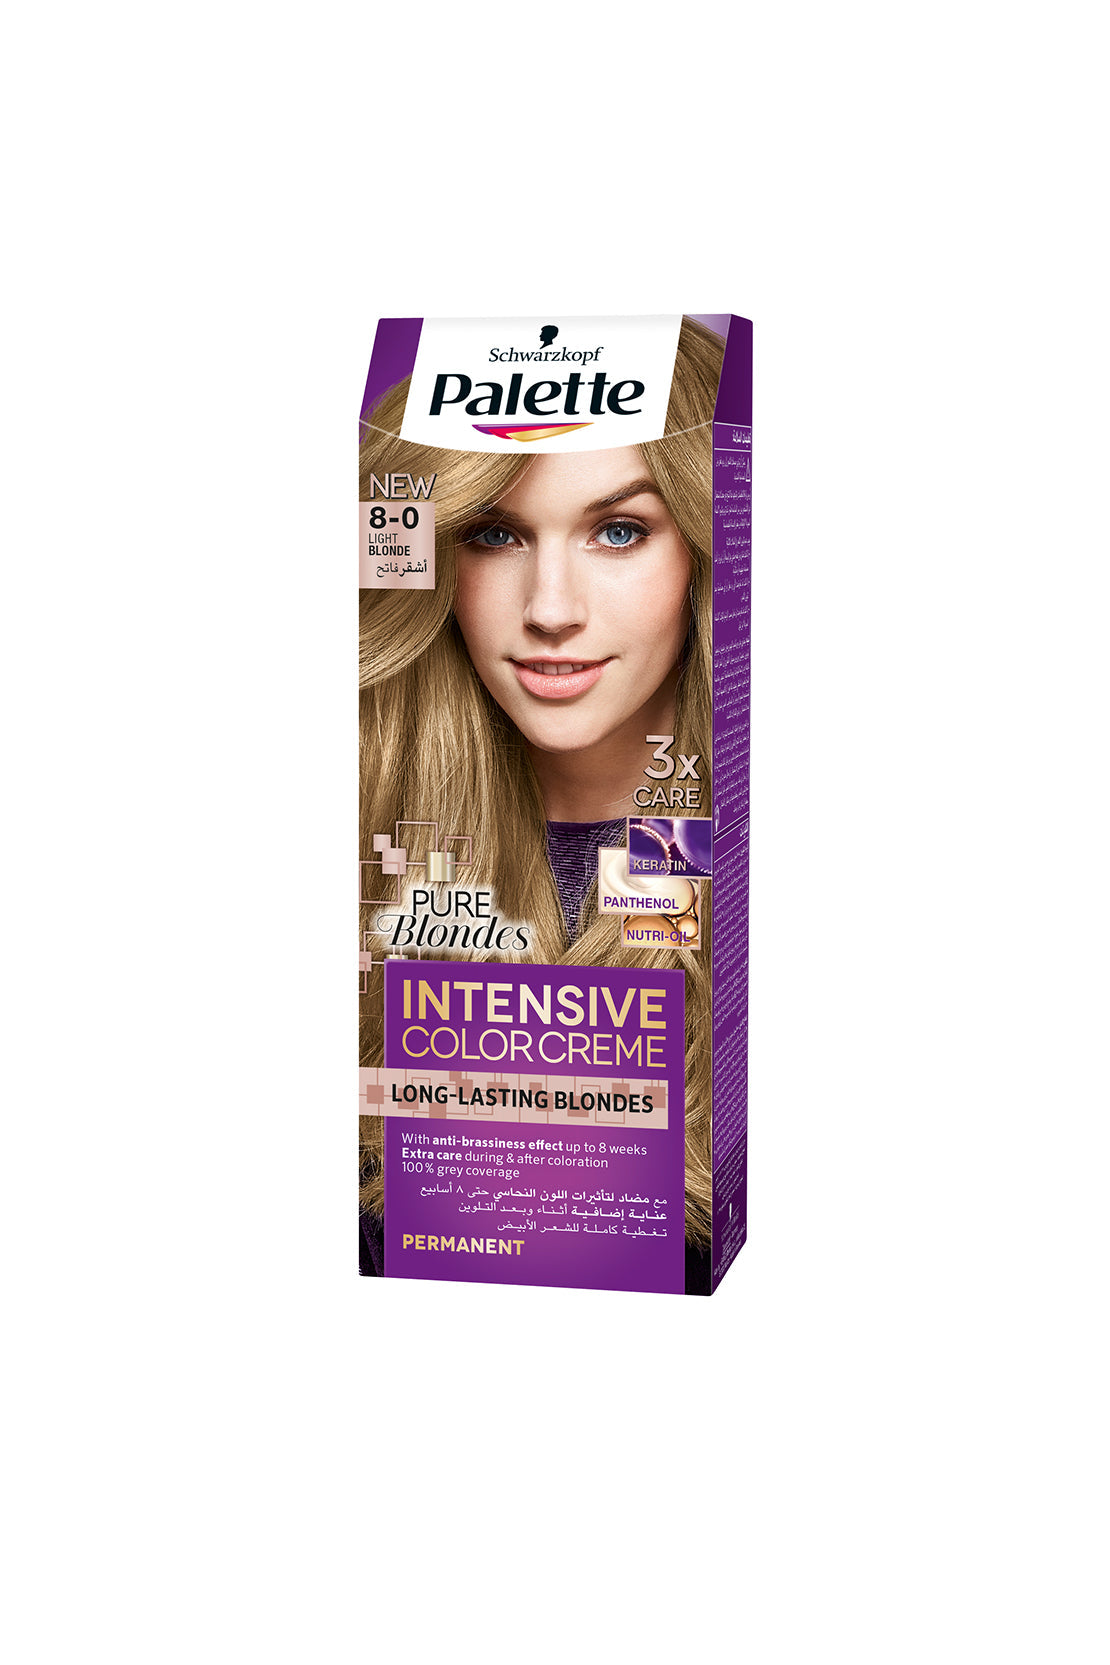 Intensive Color Creme with Long Lasting Intensity (8-0 Light Blonde) RIOS